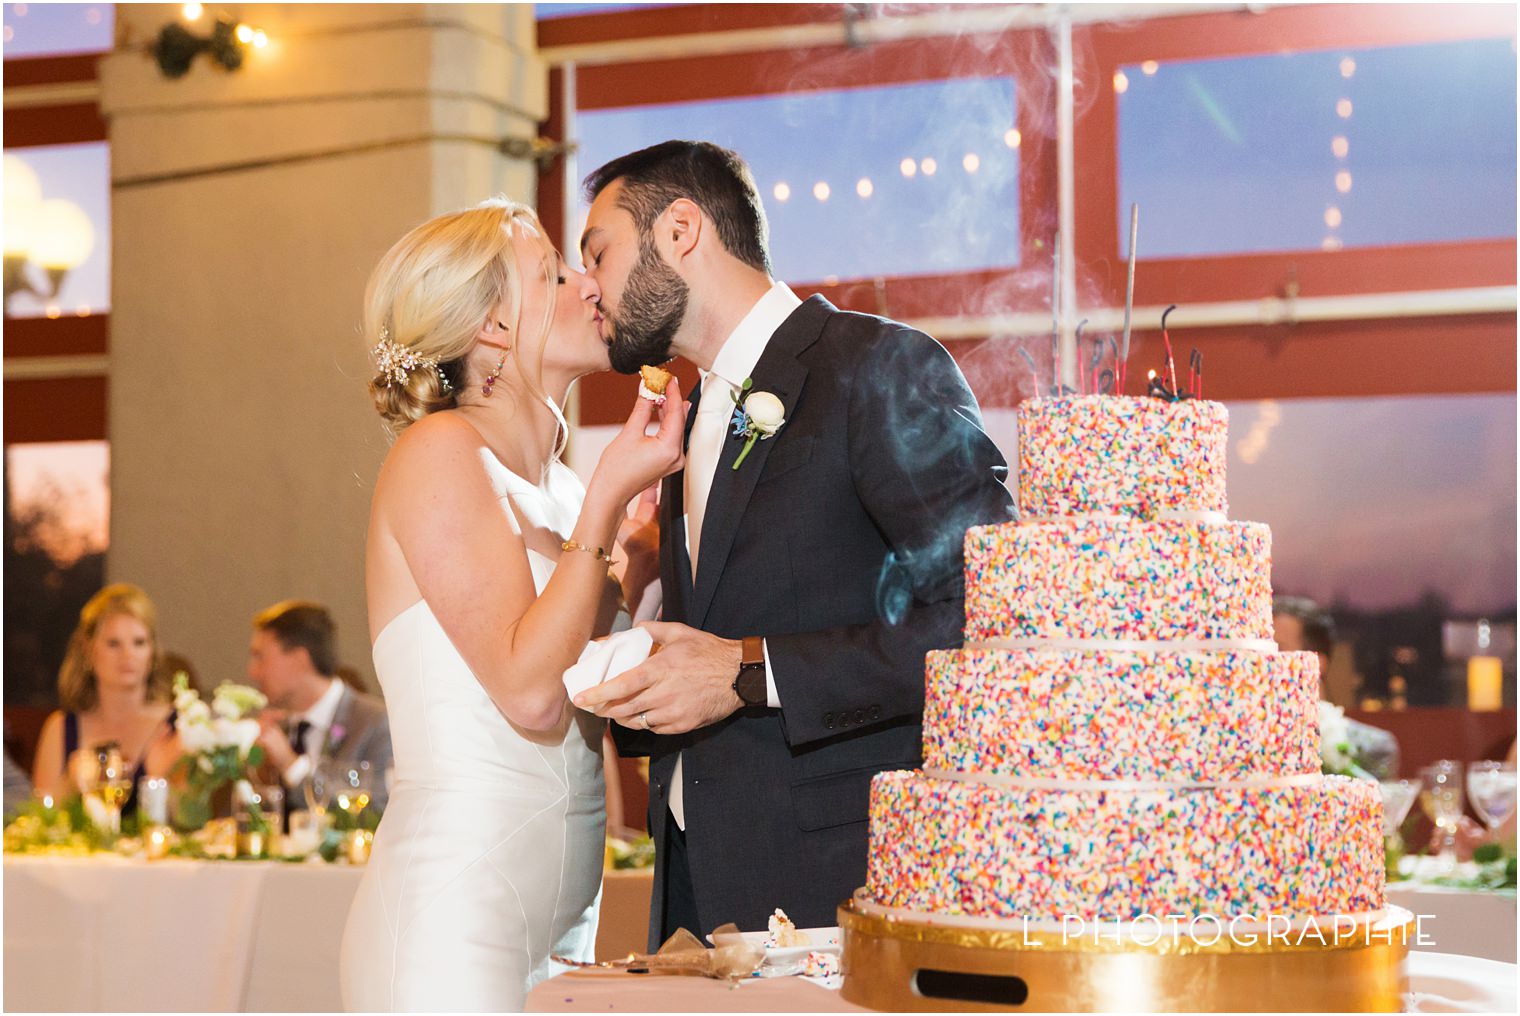 confetti wedding cake with sparklers,dylan,isabella,jewish wedding at the worlds fair pavilion,shades of lavender palette wedding colors,sparkler exit photos,summer wedding in st. louis in forest park,worlds fair pavilion wedding photos,